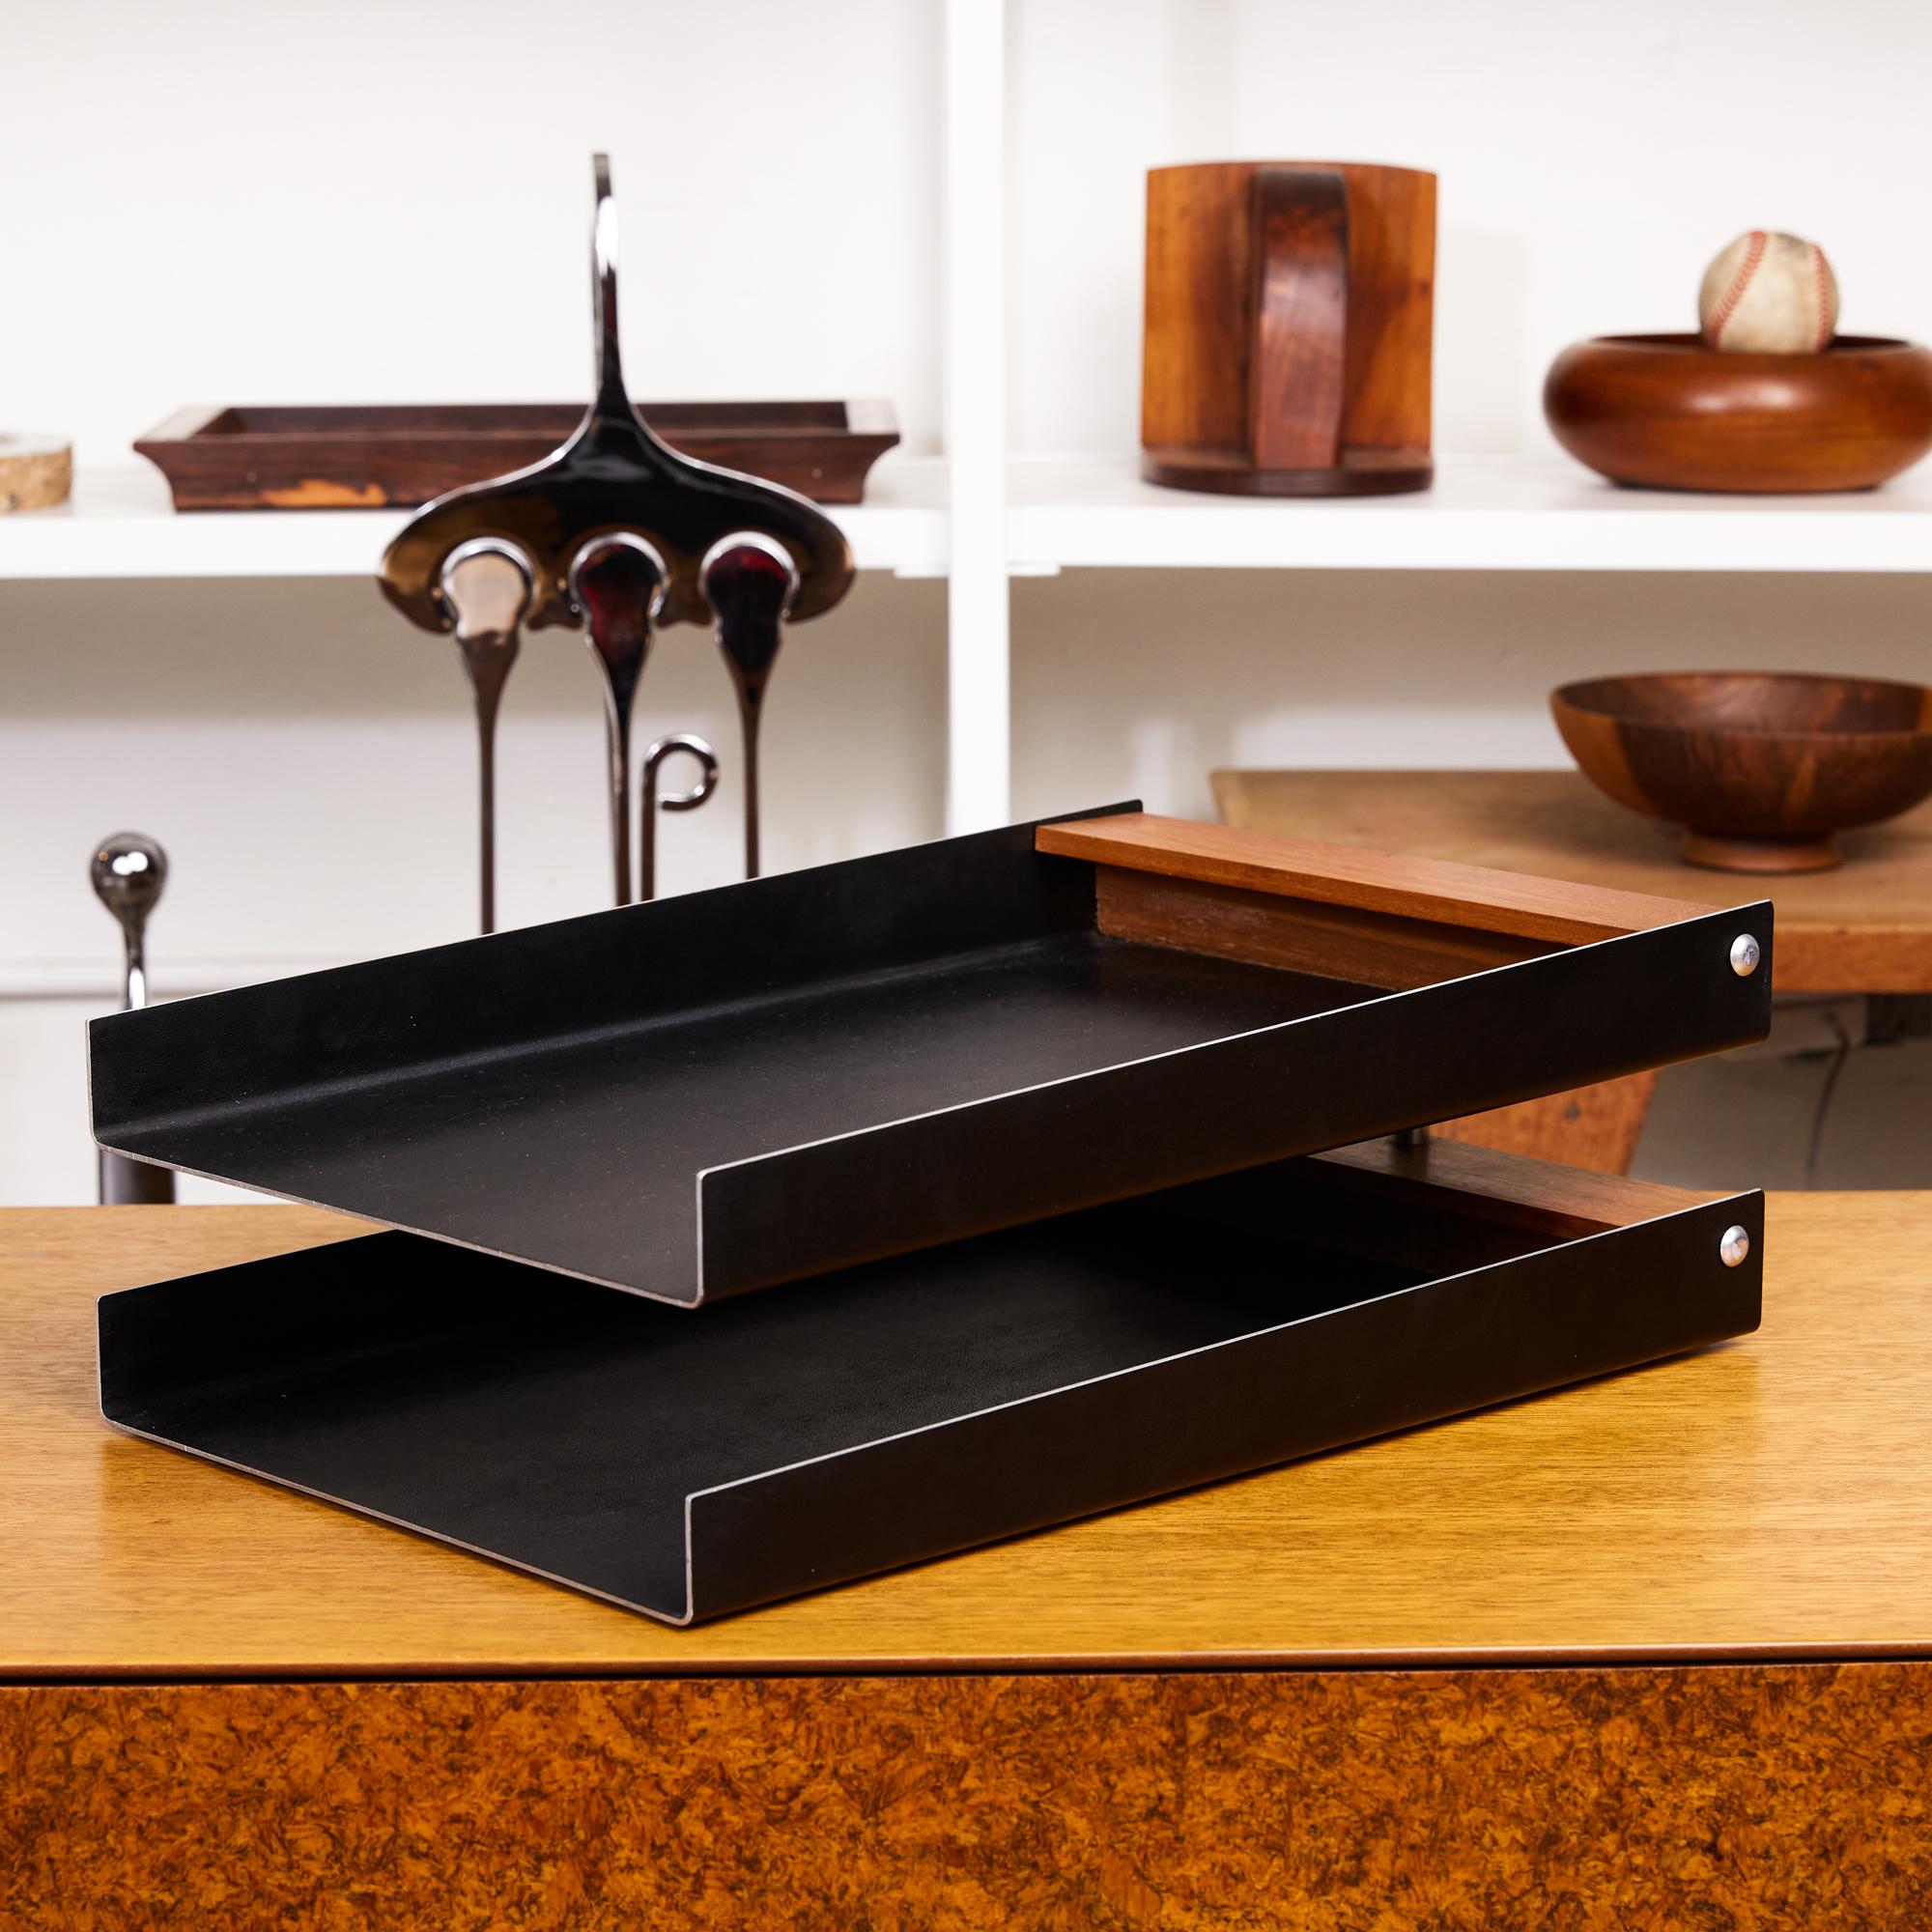 This 1950s in/out tray for office or study has two tiers, in original enameled matte black steel that rotate around a central post of brushed steel. The trays are finished with an inset back panel of solid walnut. 

Tray bottoms retain the